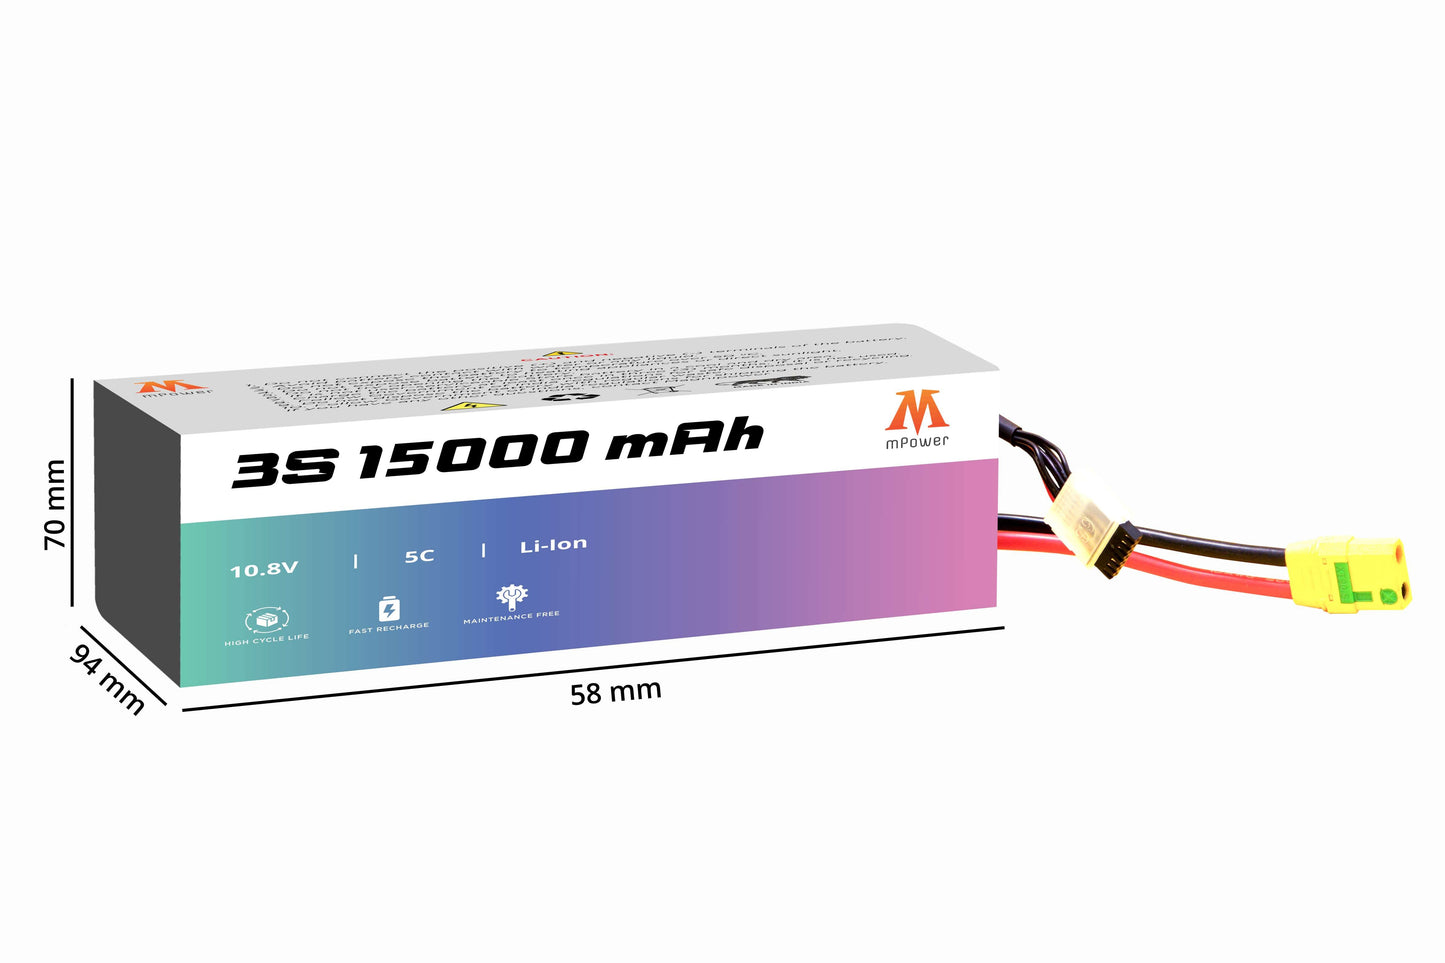 mPower 3S 15000mAh Lithium-Ion Battery for Survey Drones